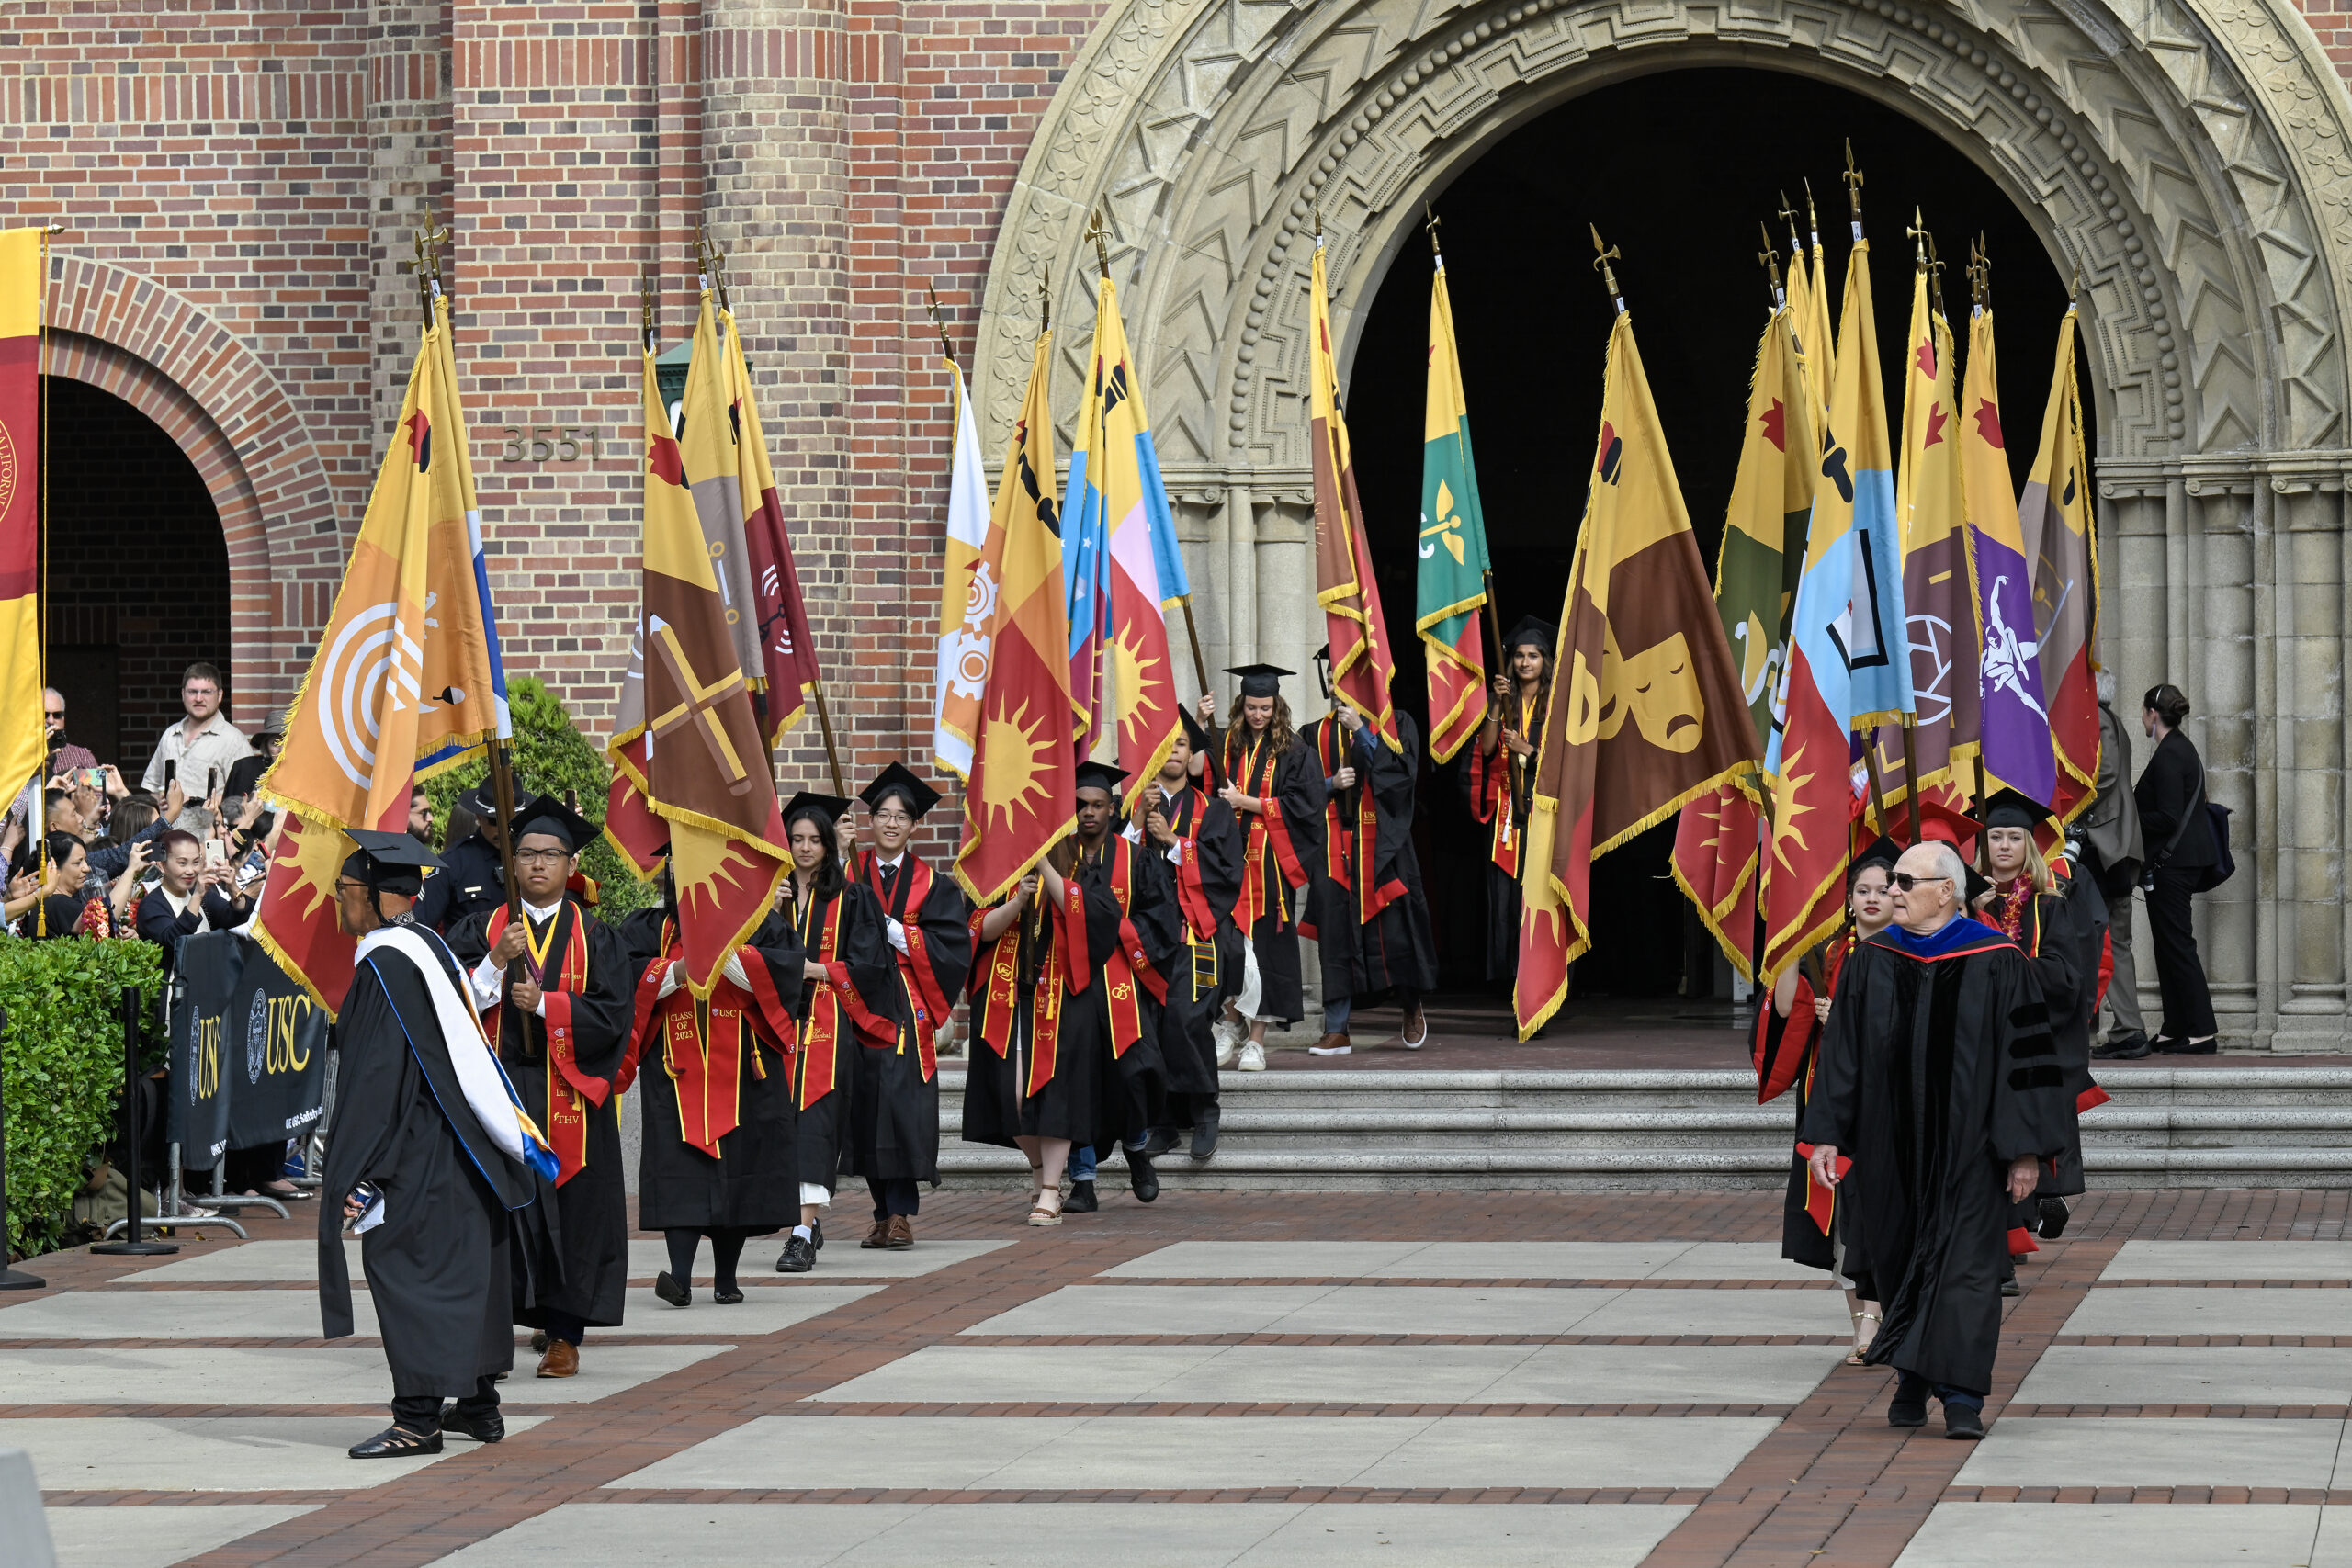 The procession marks the start of the 140th commencement ceremony at the University of Southern California, May 12, 2023. (Photo/Gus Ruelas)